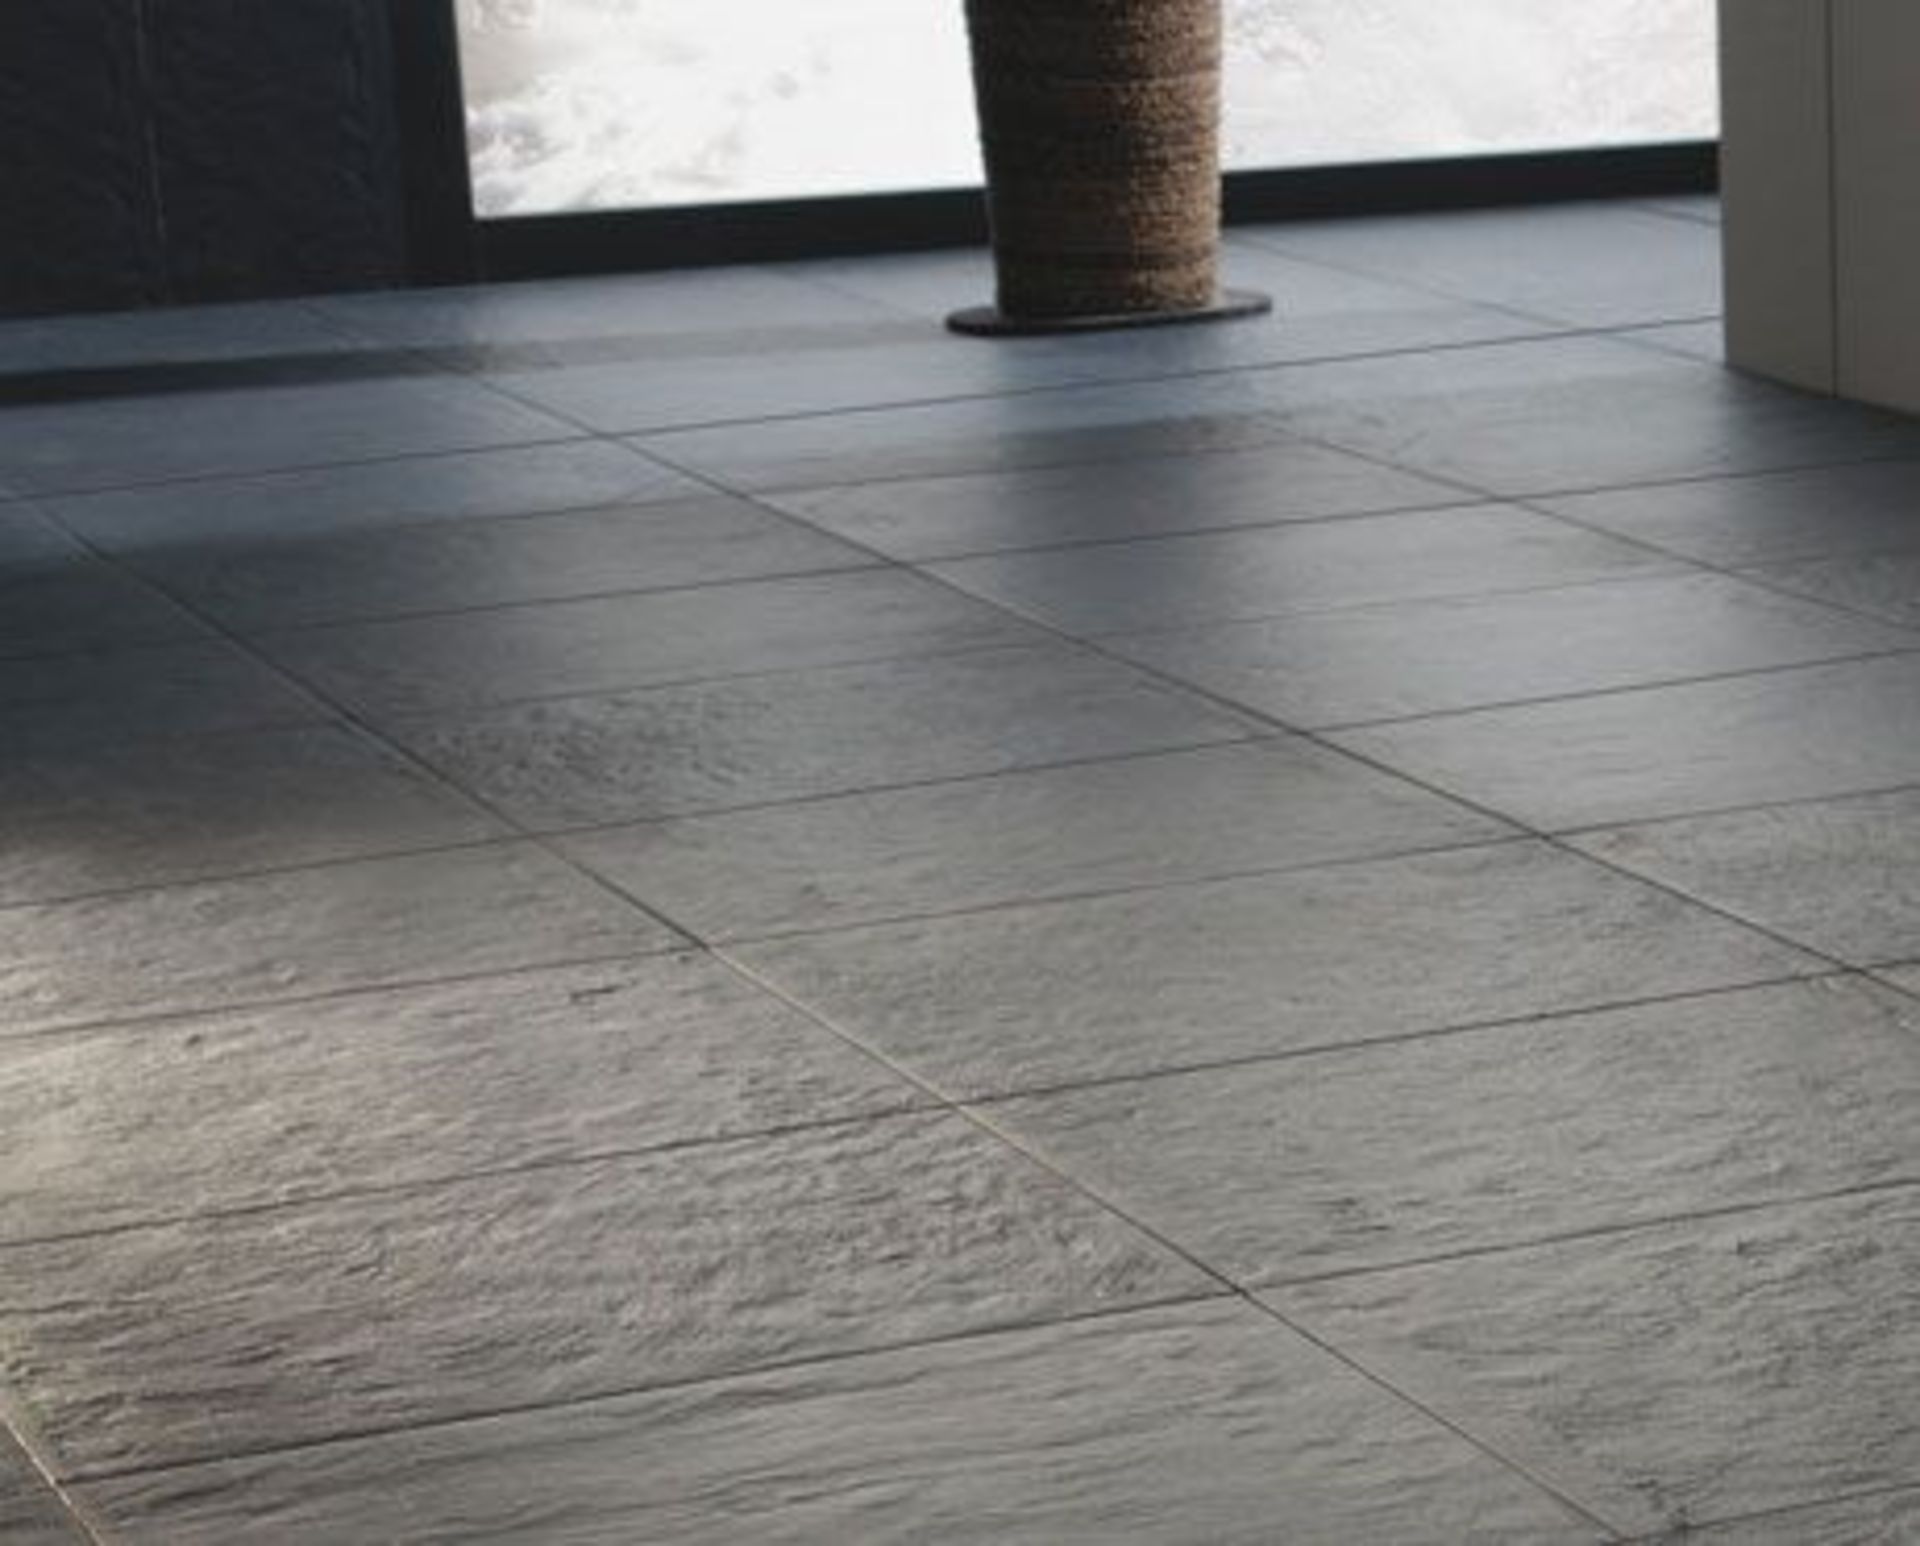 (Z5) 6.48M2 600x300mm Black Slate Floor and Wall Tiles. 9.5mm Width. Add contrast and depth to... - Image 2 of 2